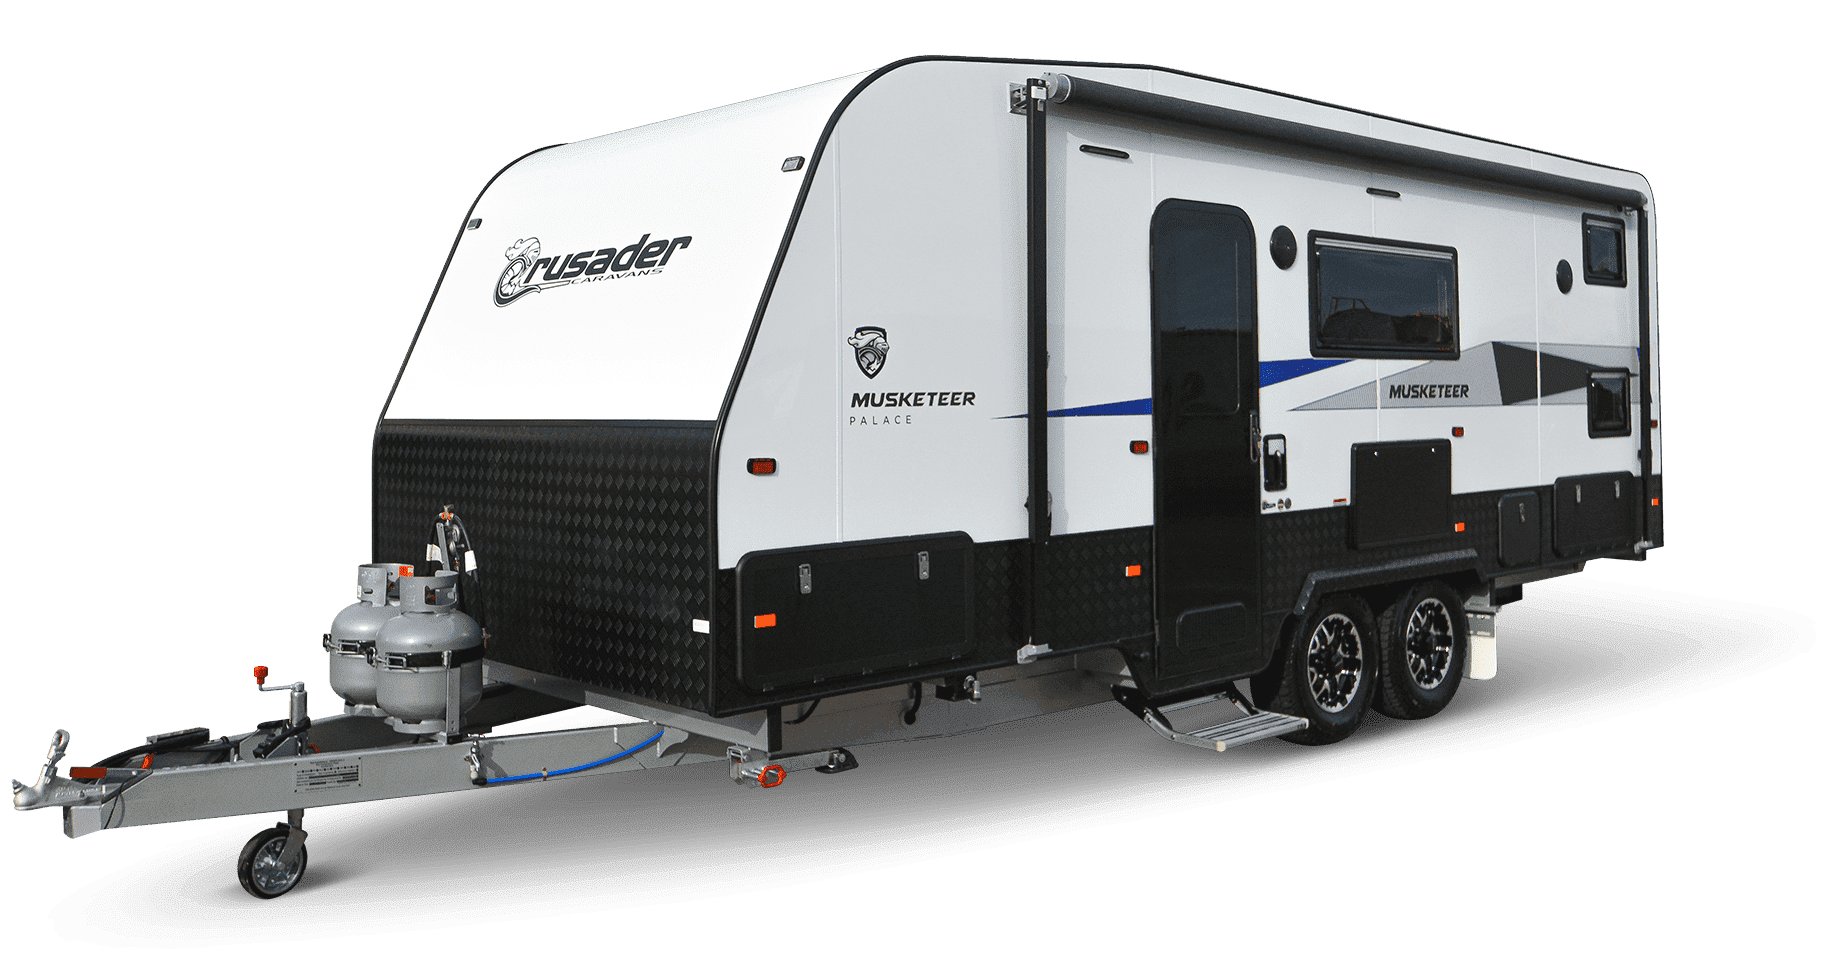 Crusader Musketeer palace a new caravan for sale at Lewis RV.